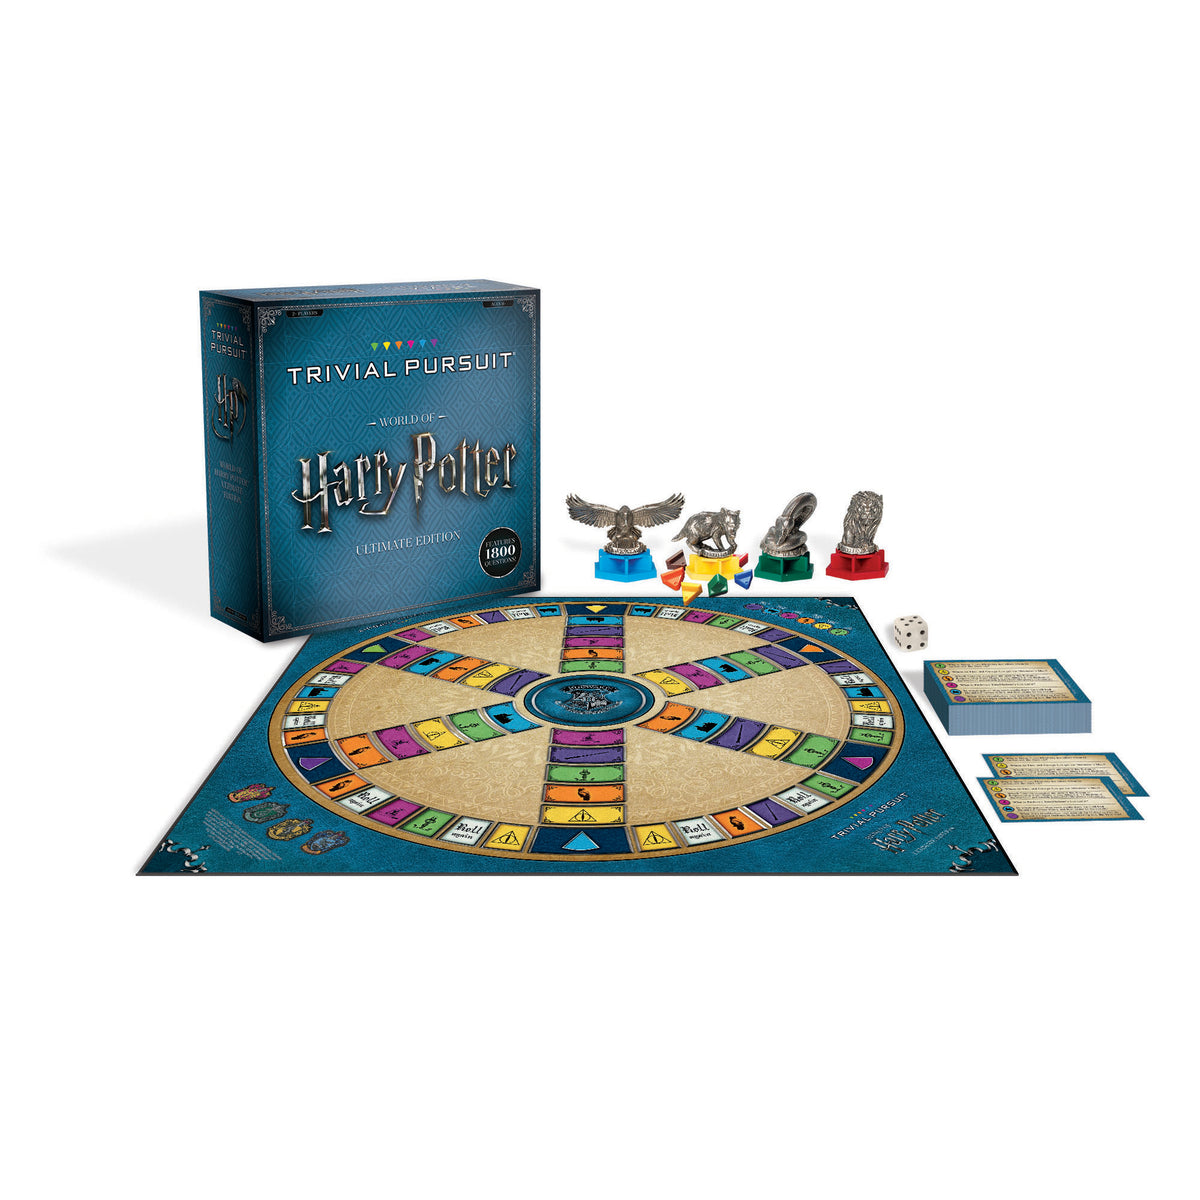 TRIVIAL PURSUIT World of Harry Potter Ultimate Edition – Hasbro Pulse